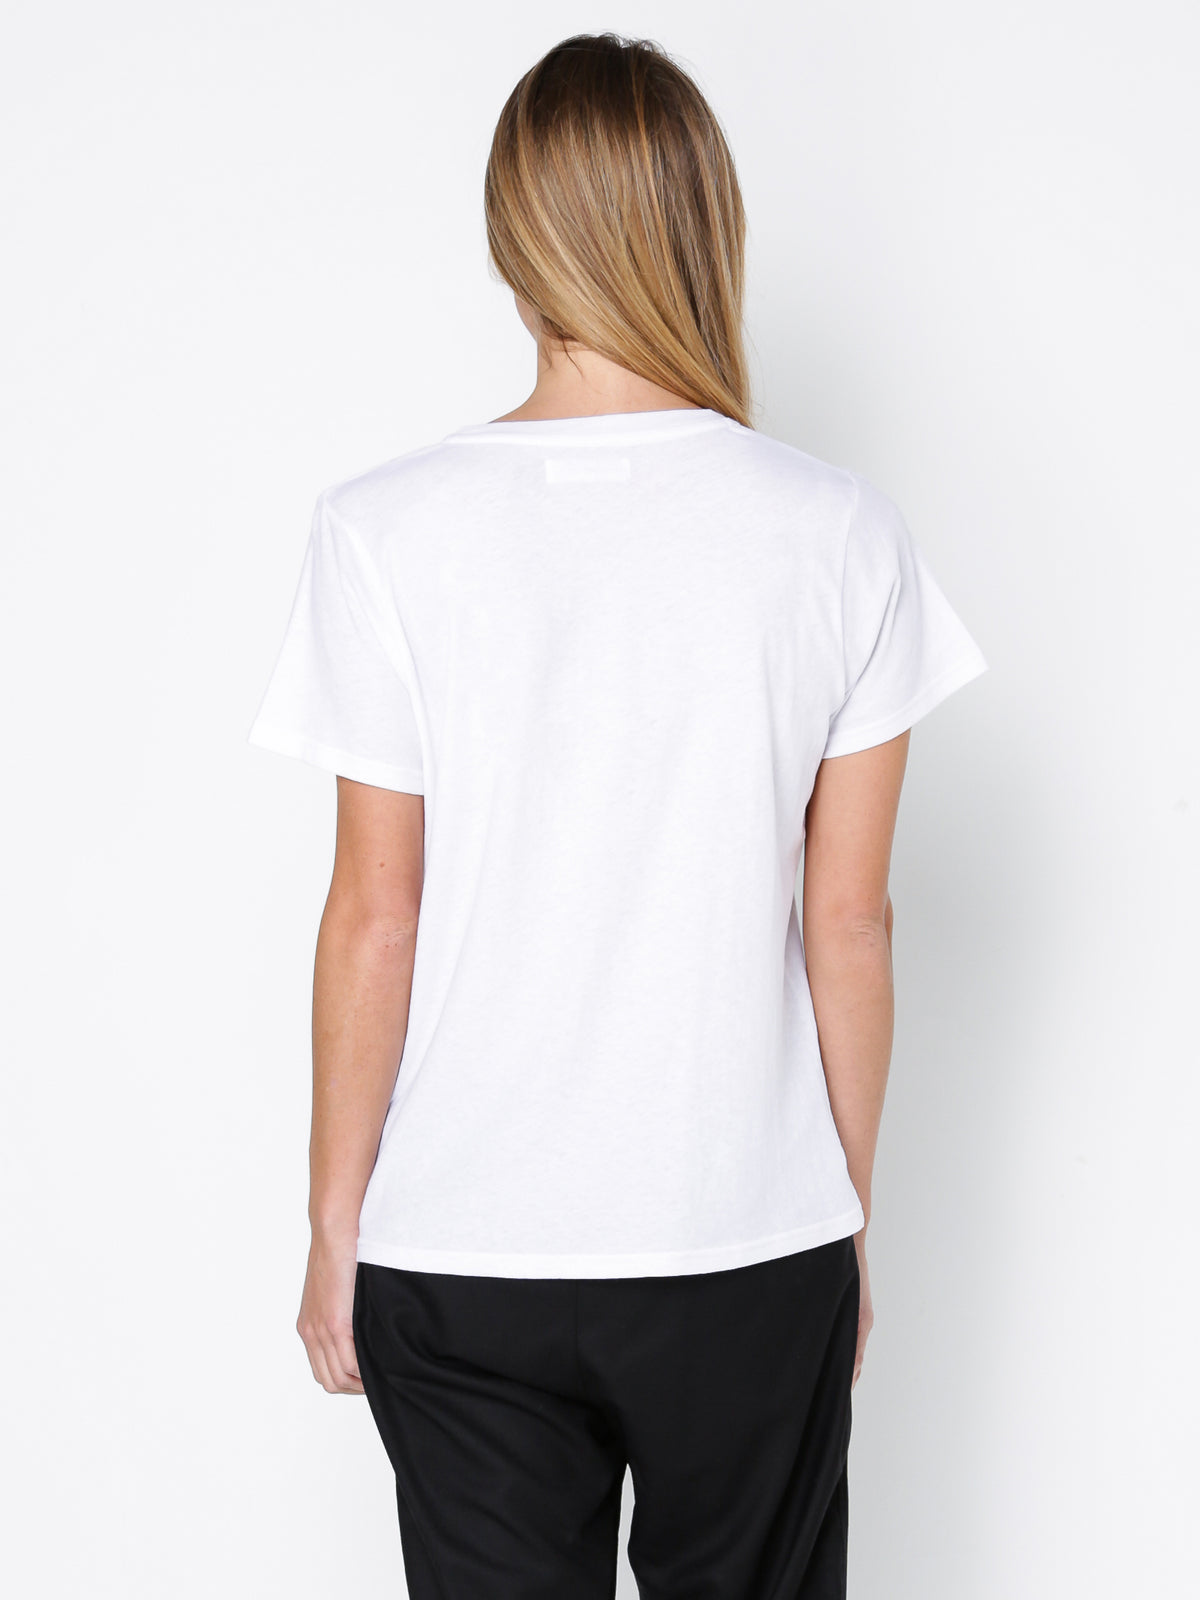 Collate T-Shirt in White